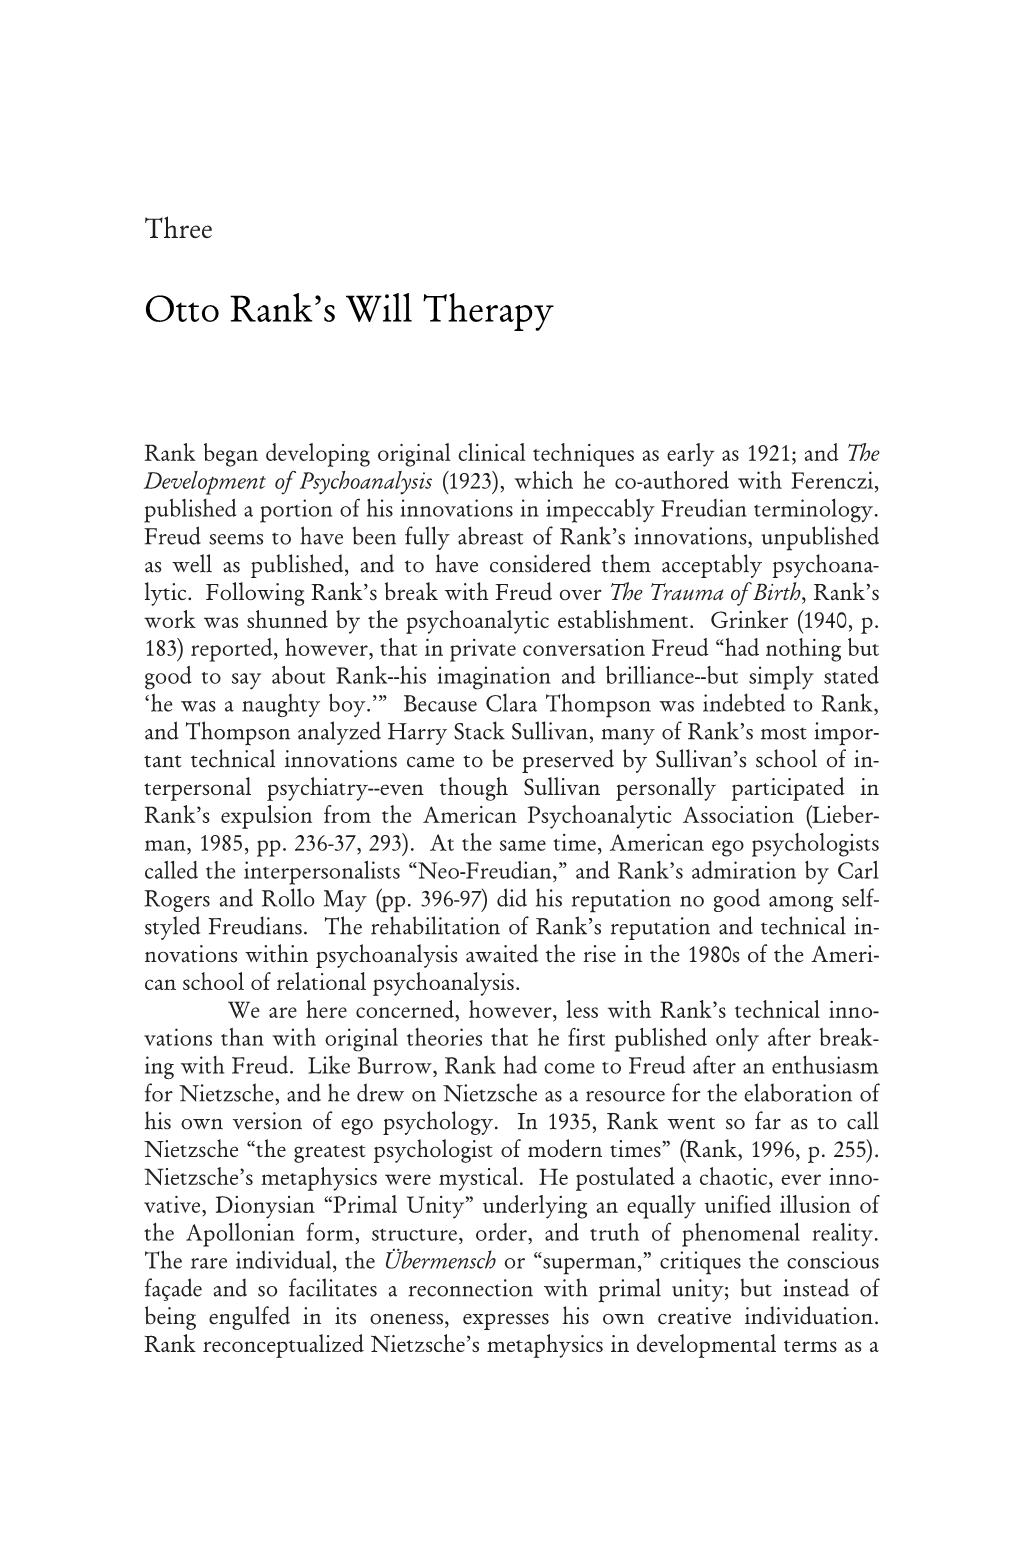 Otto Rank's Will Therapy